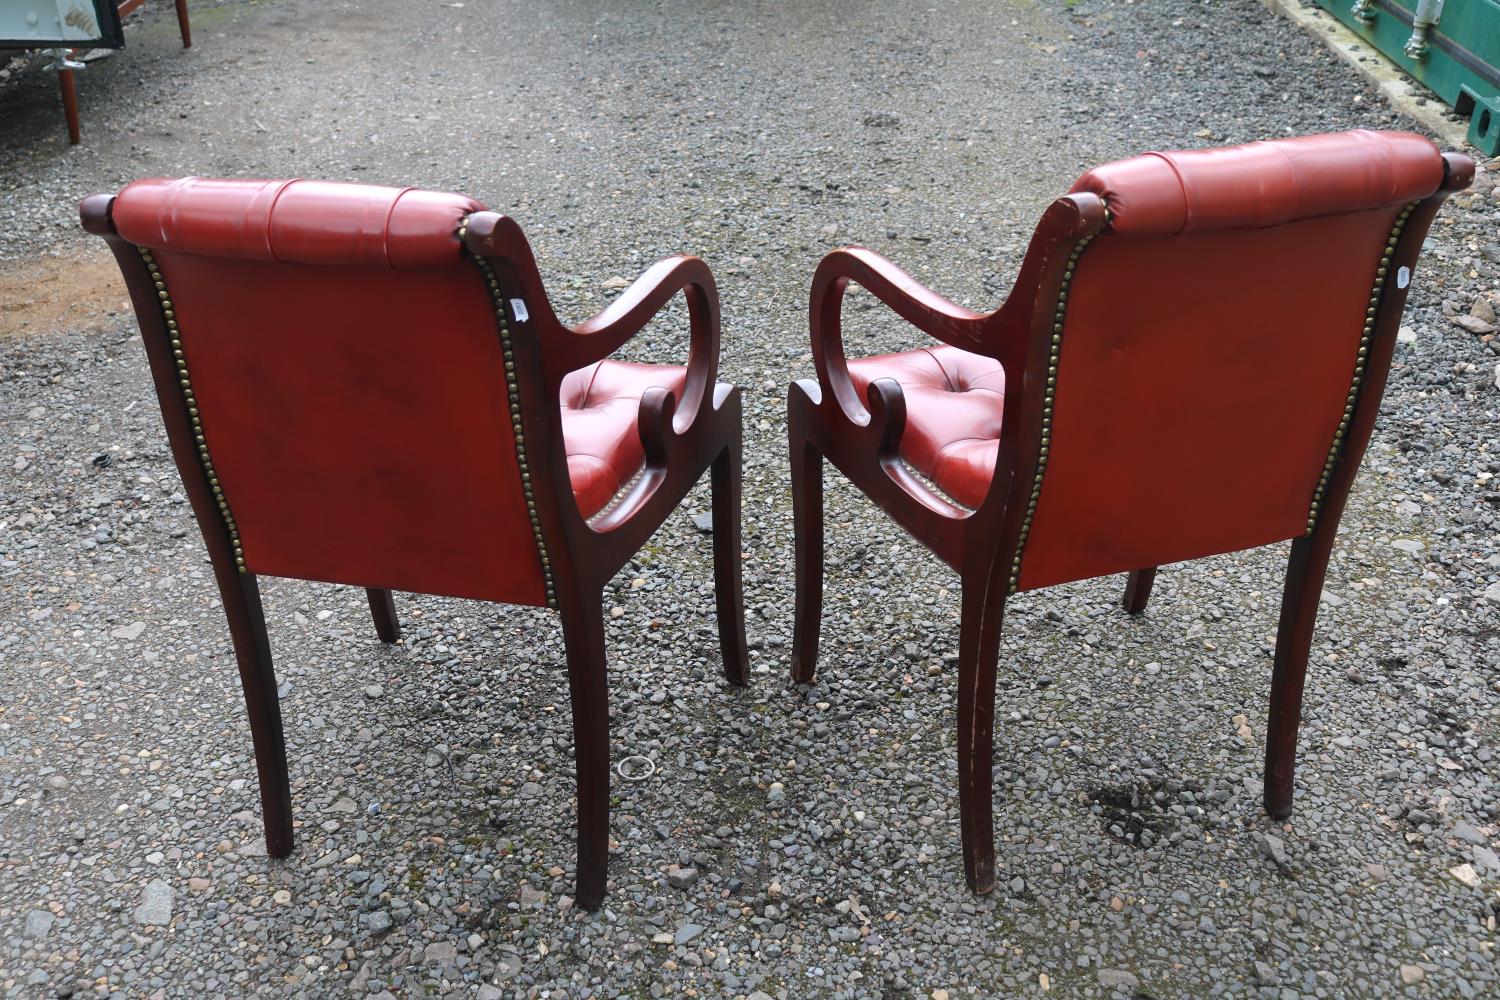 Pair of 20thC Chesterfield Button back Red Leather studded Elbow chairs with scroll arms - Image 4 of 4